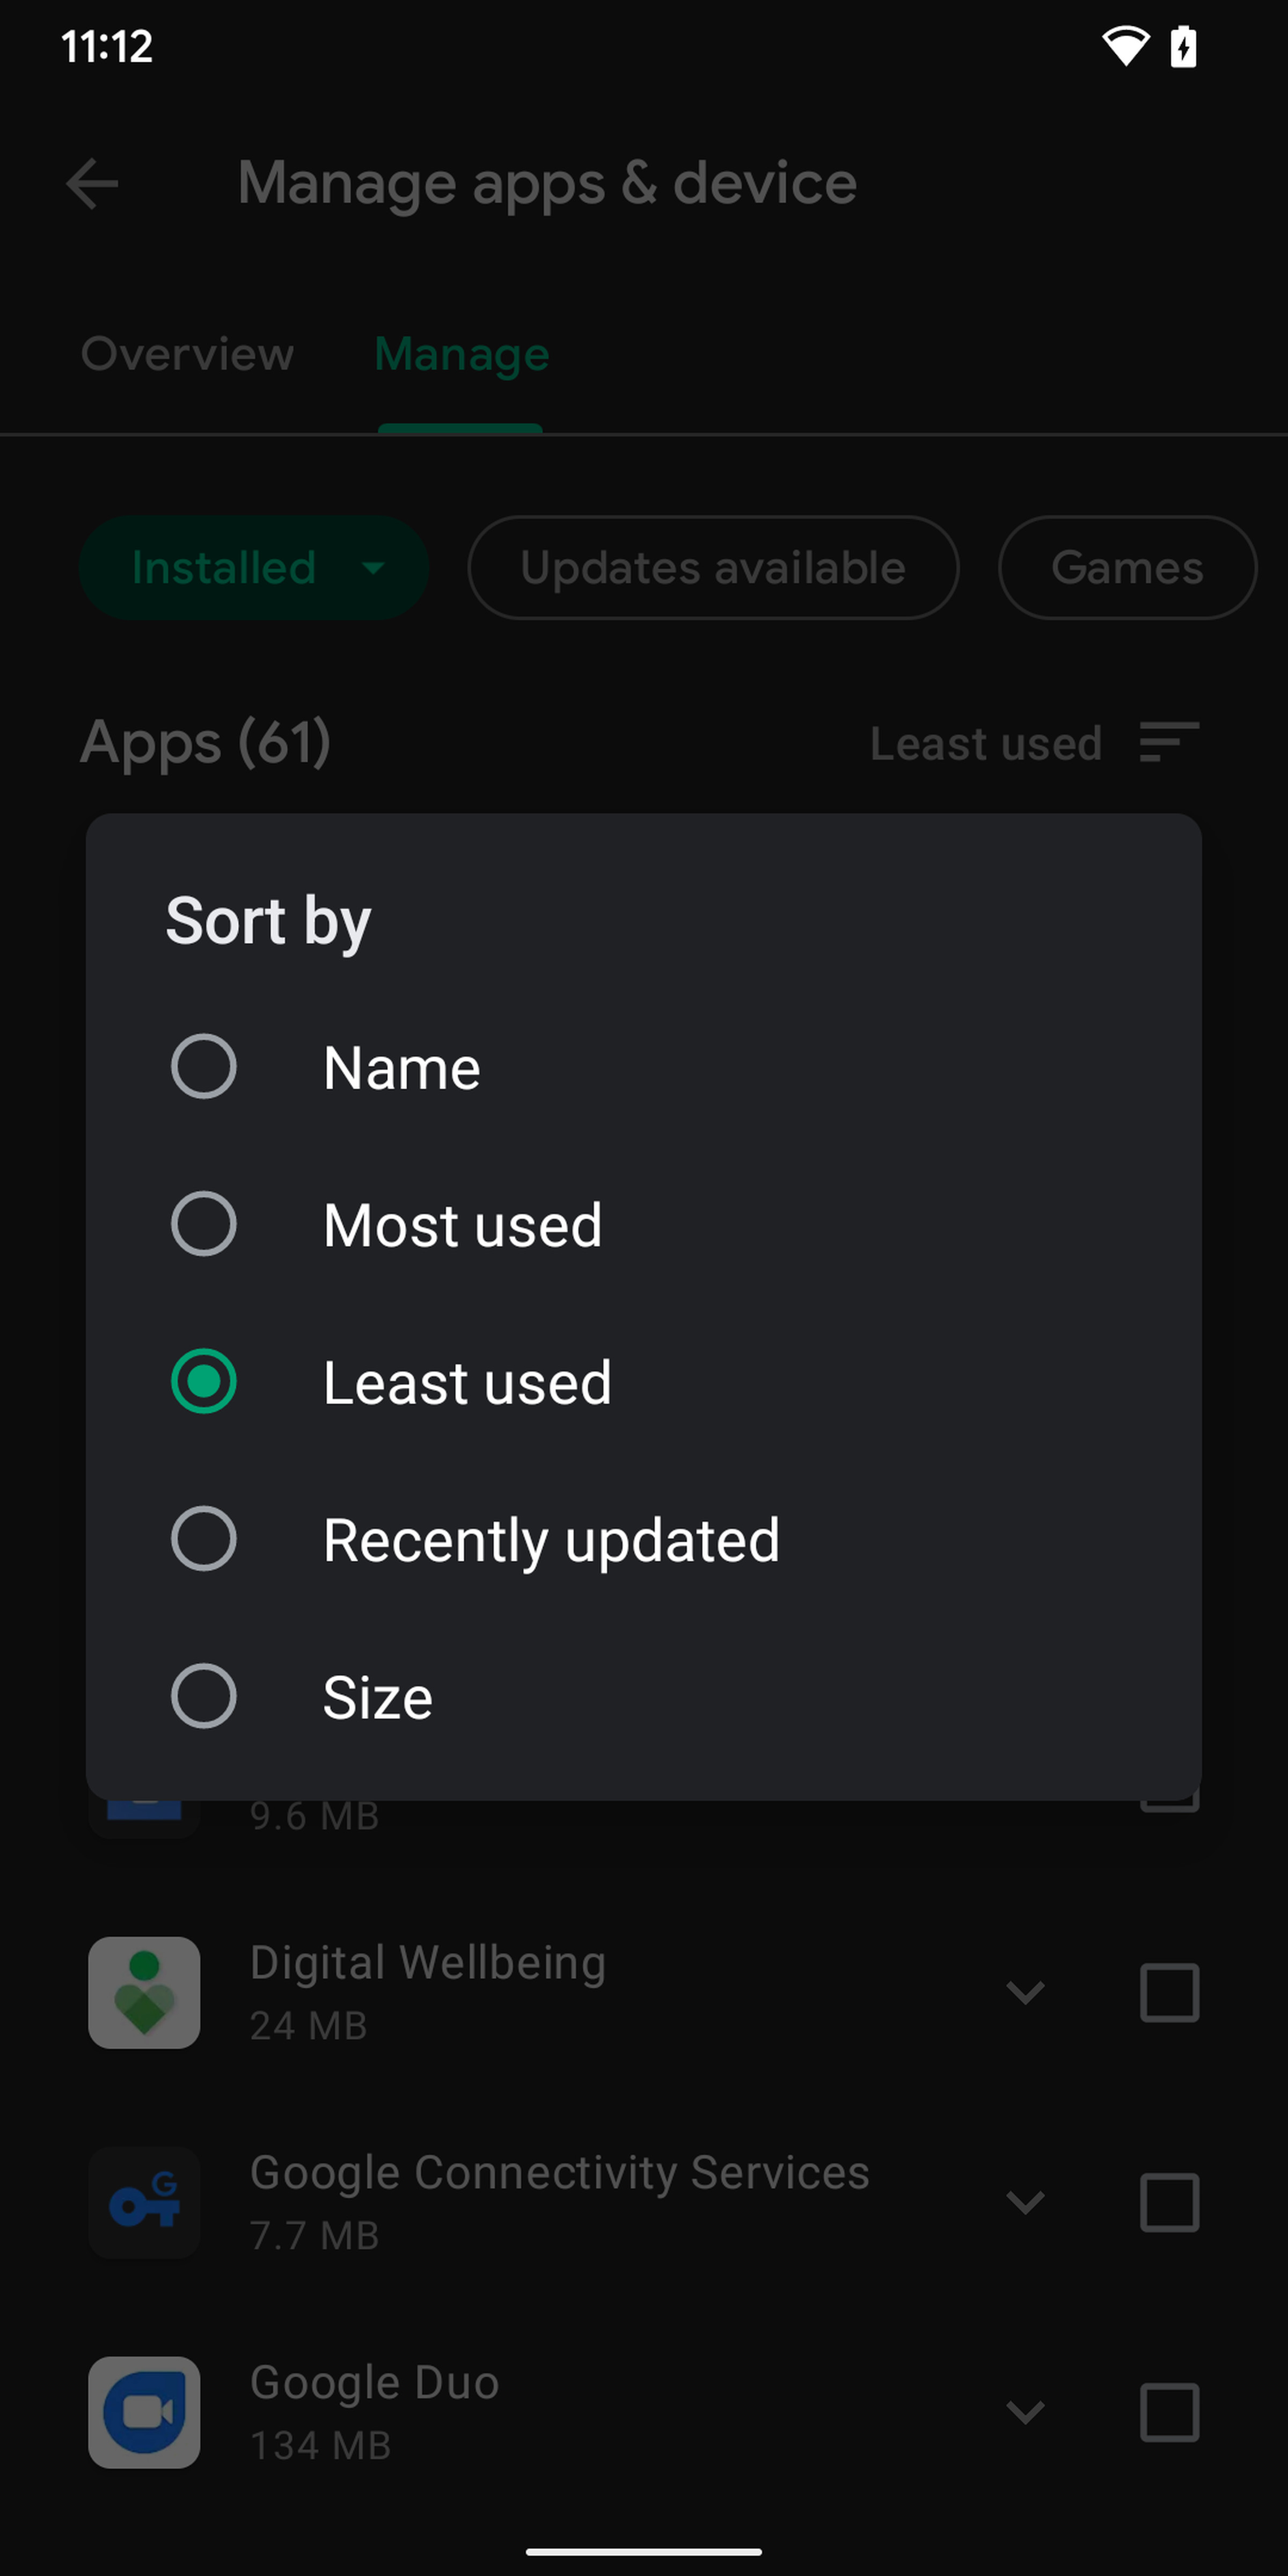 You can sort your apps by the least used.